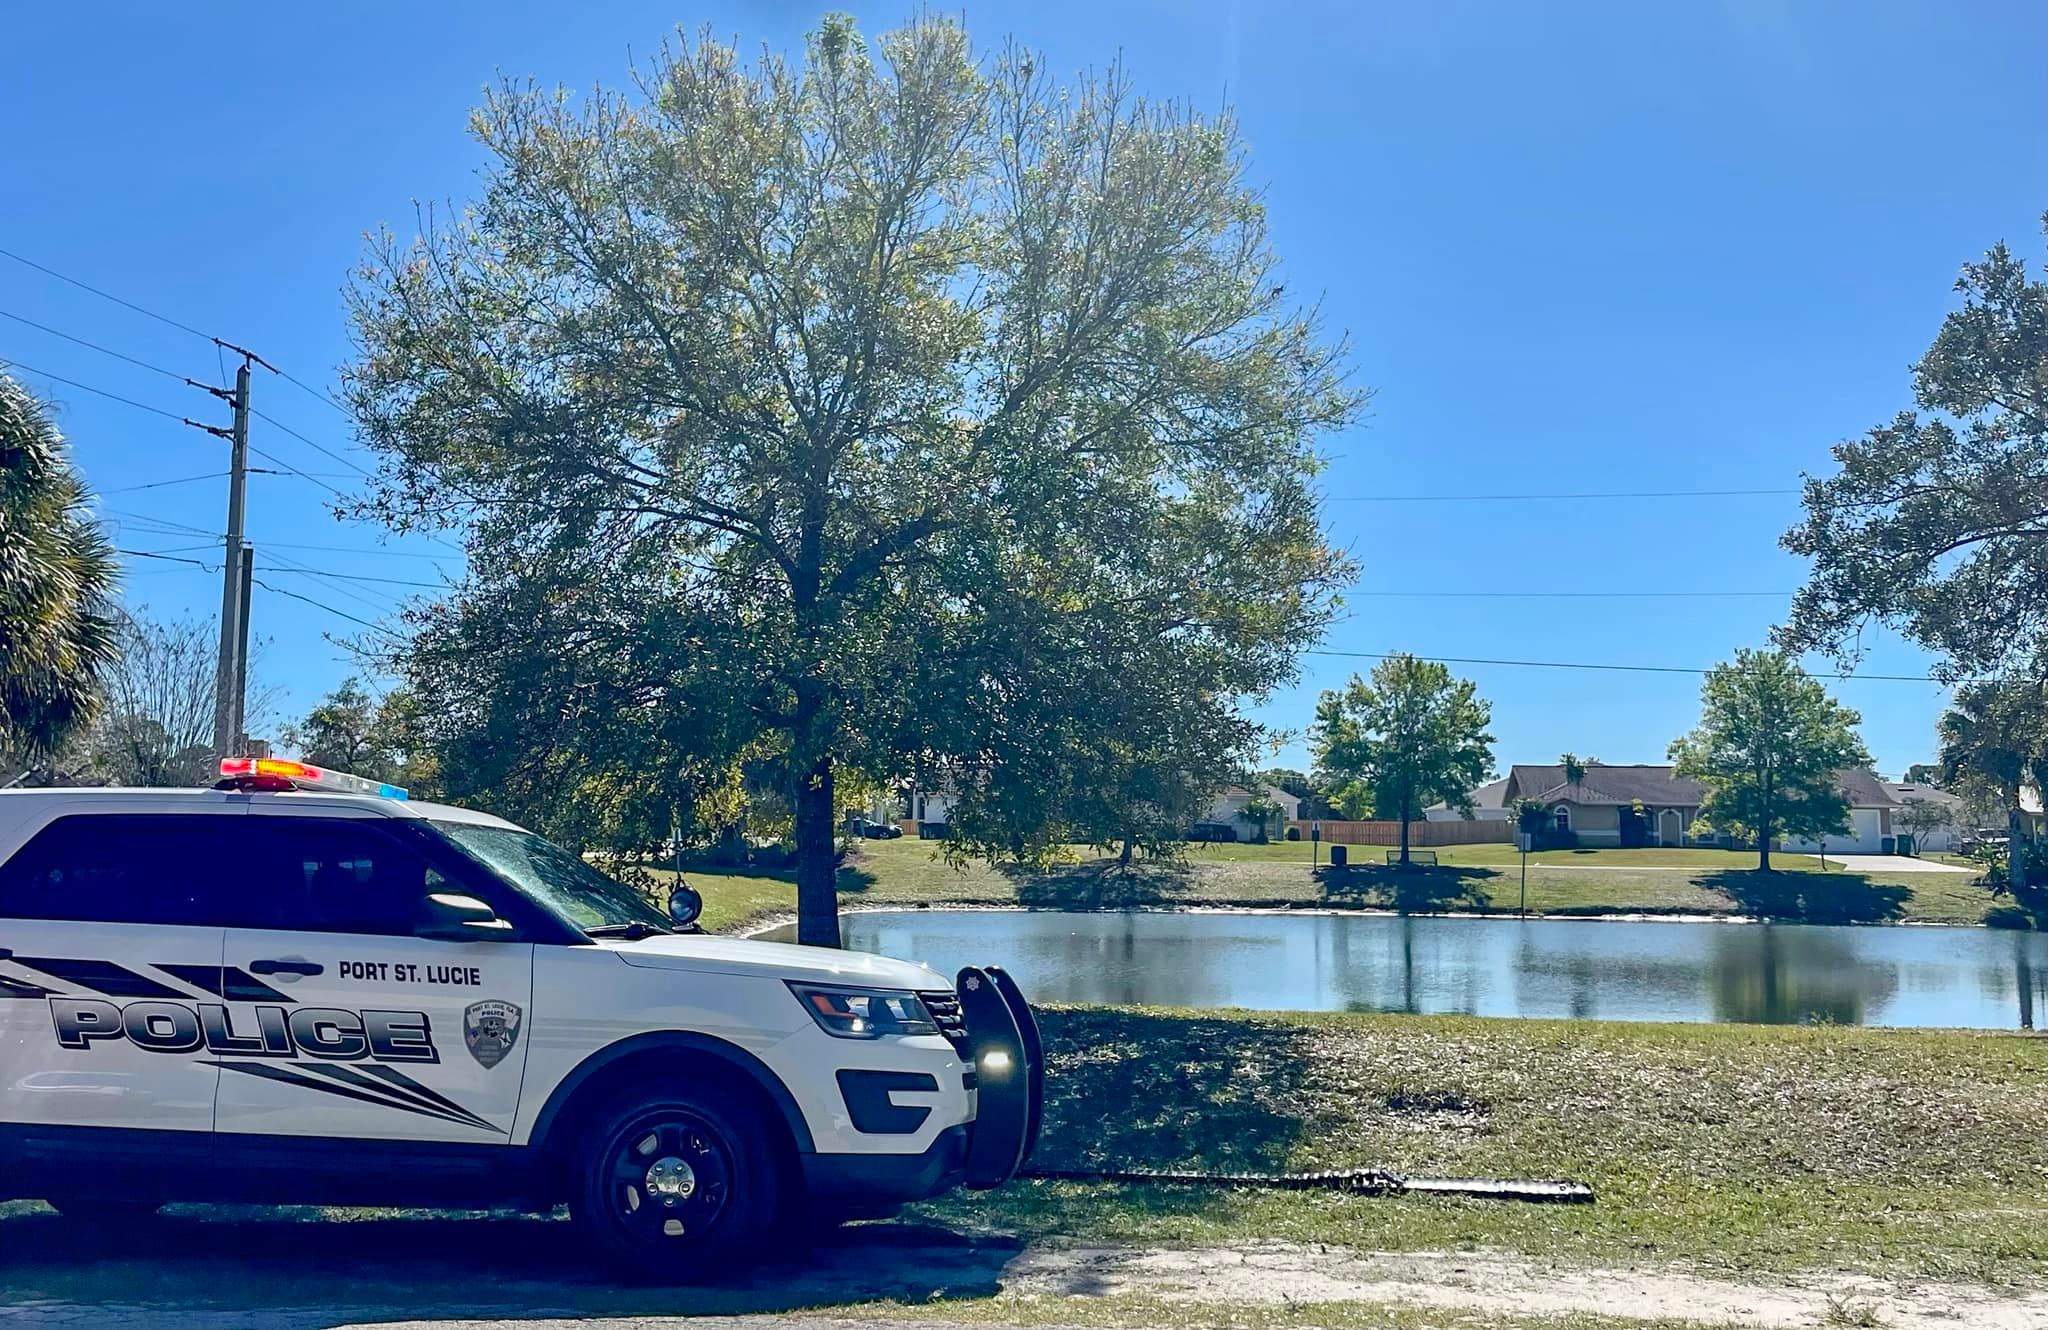 a port st. lucie police department car parked in front of a lake that an 81 year old man named harry smith fell into